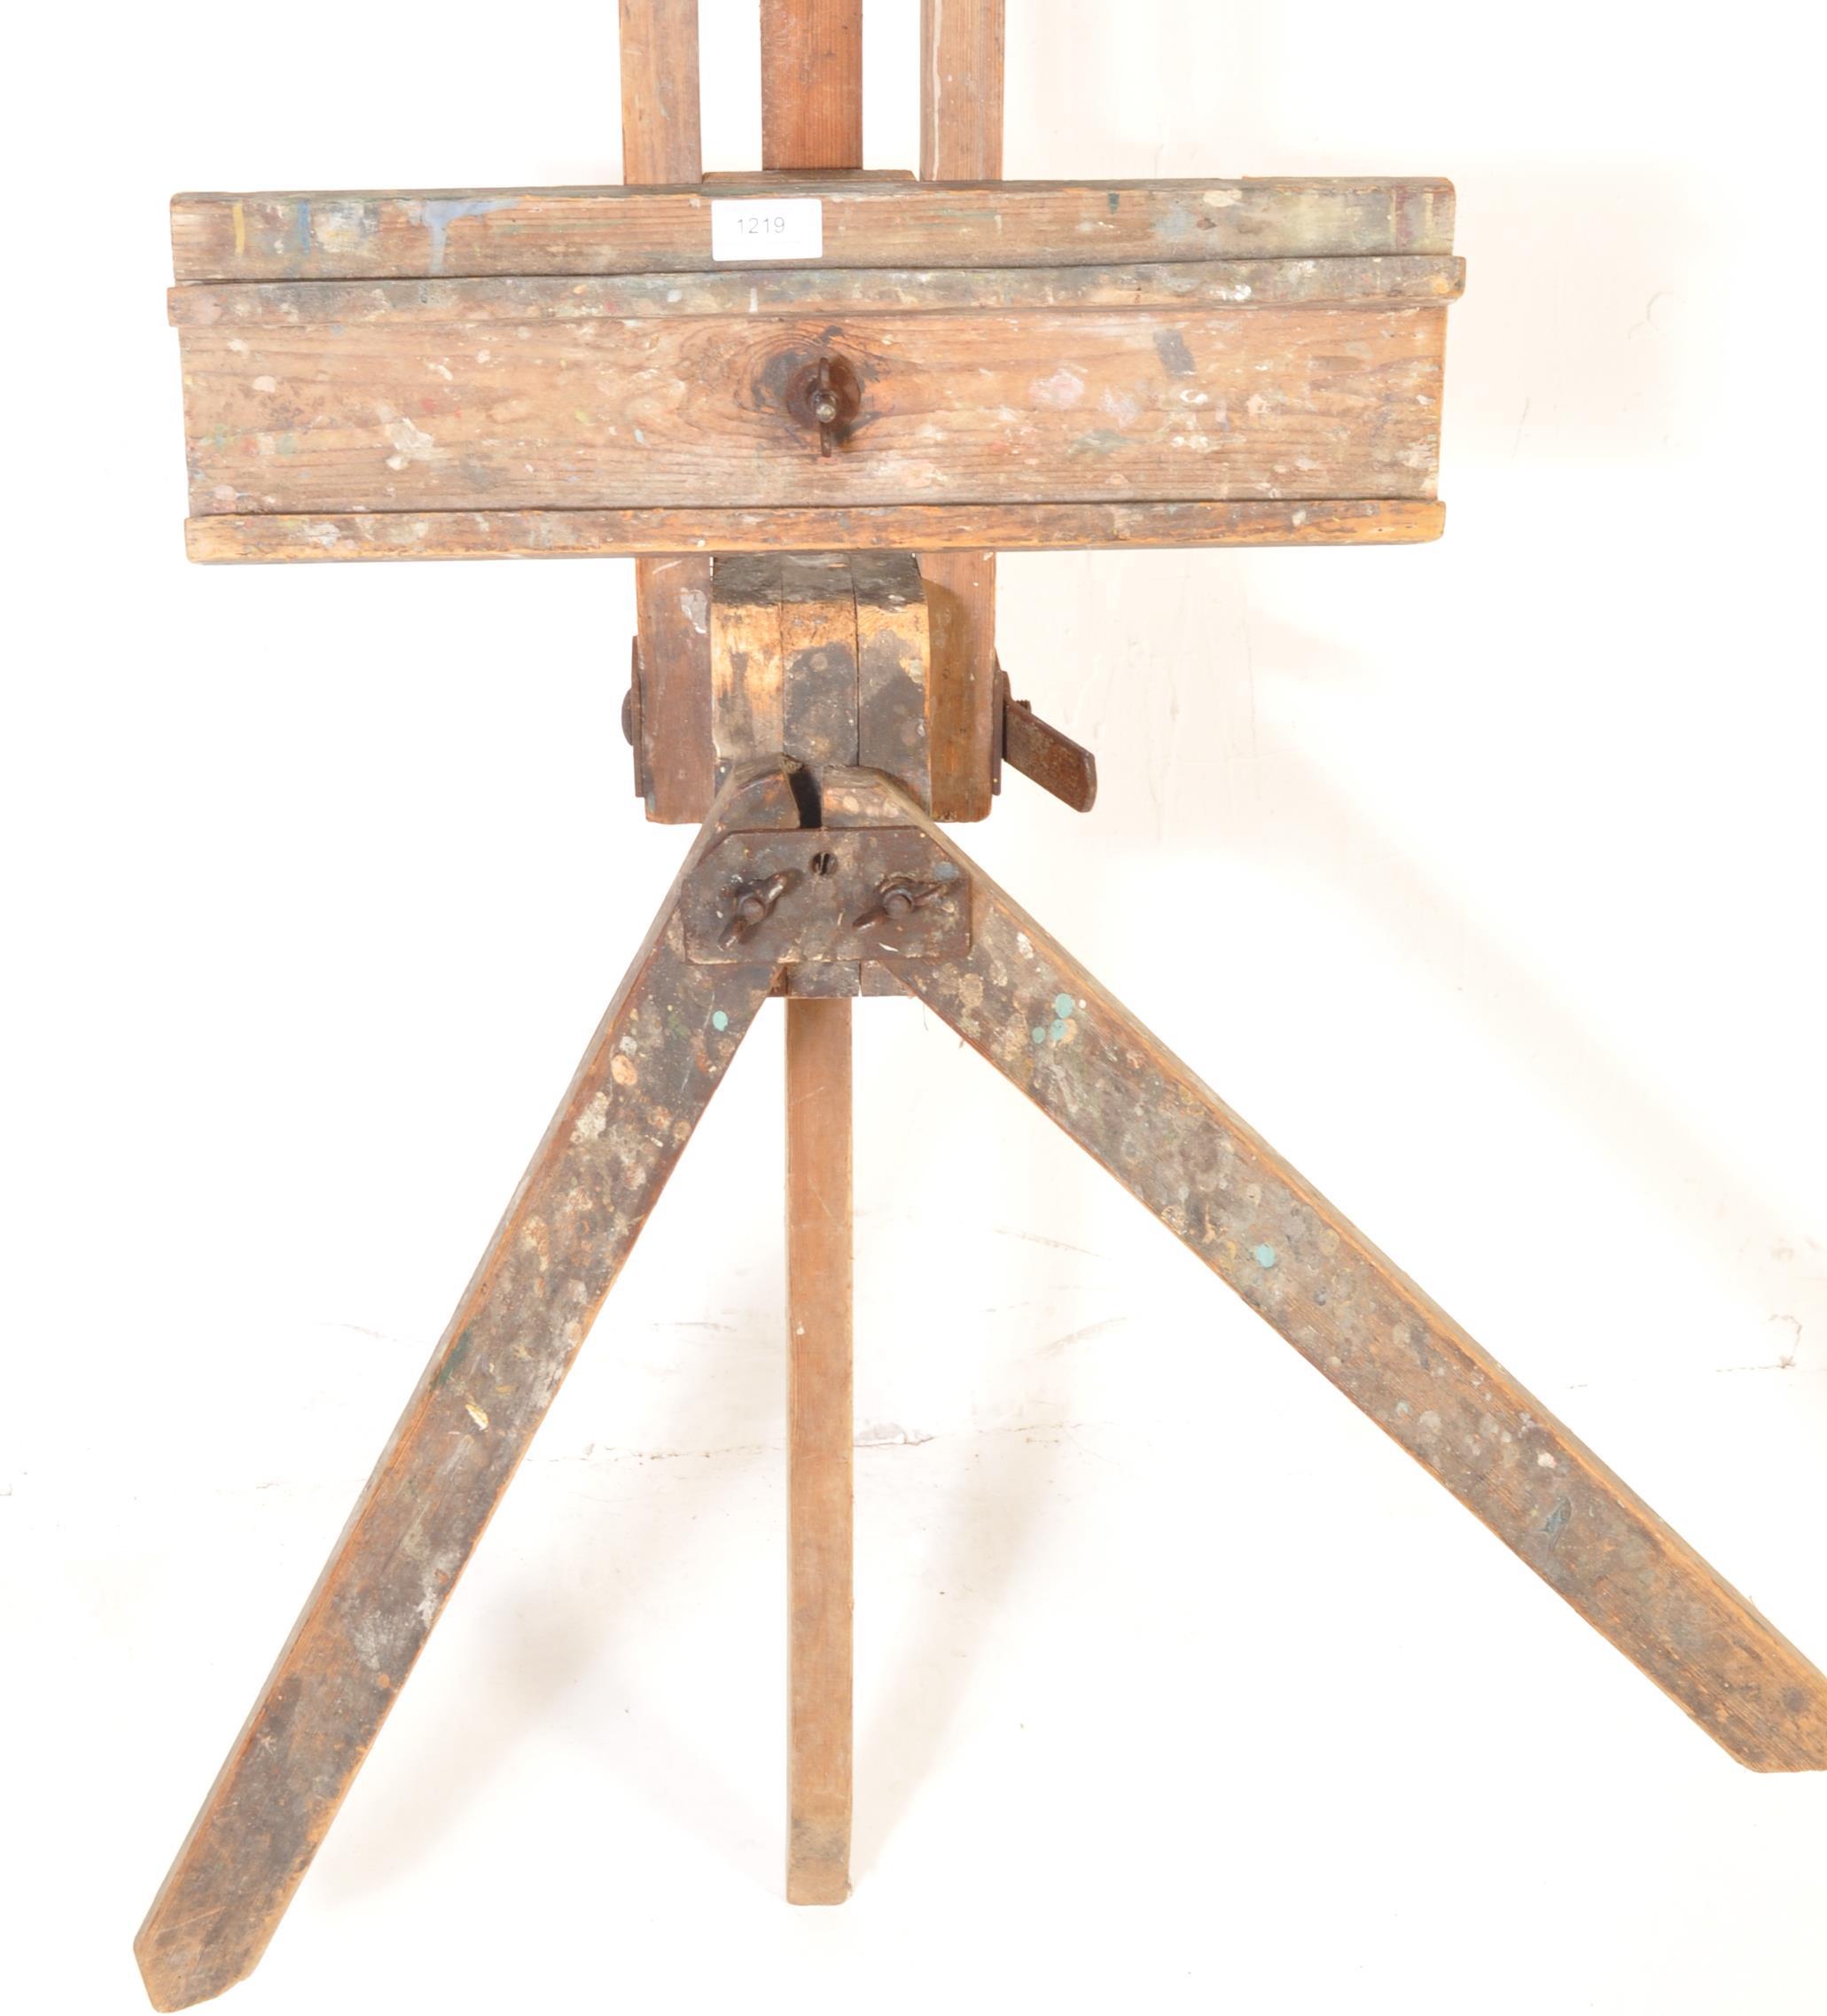 LARGE VINTAGE 20TH CENTURY WOODEN ARTISTS EASEL - Image 7 of 7